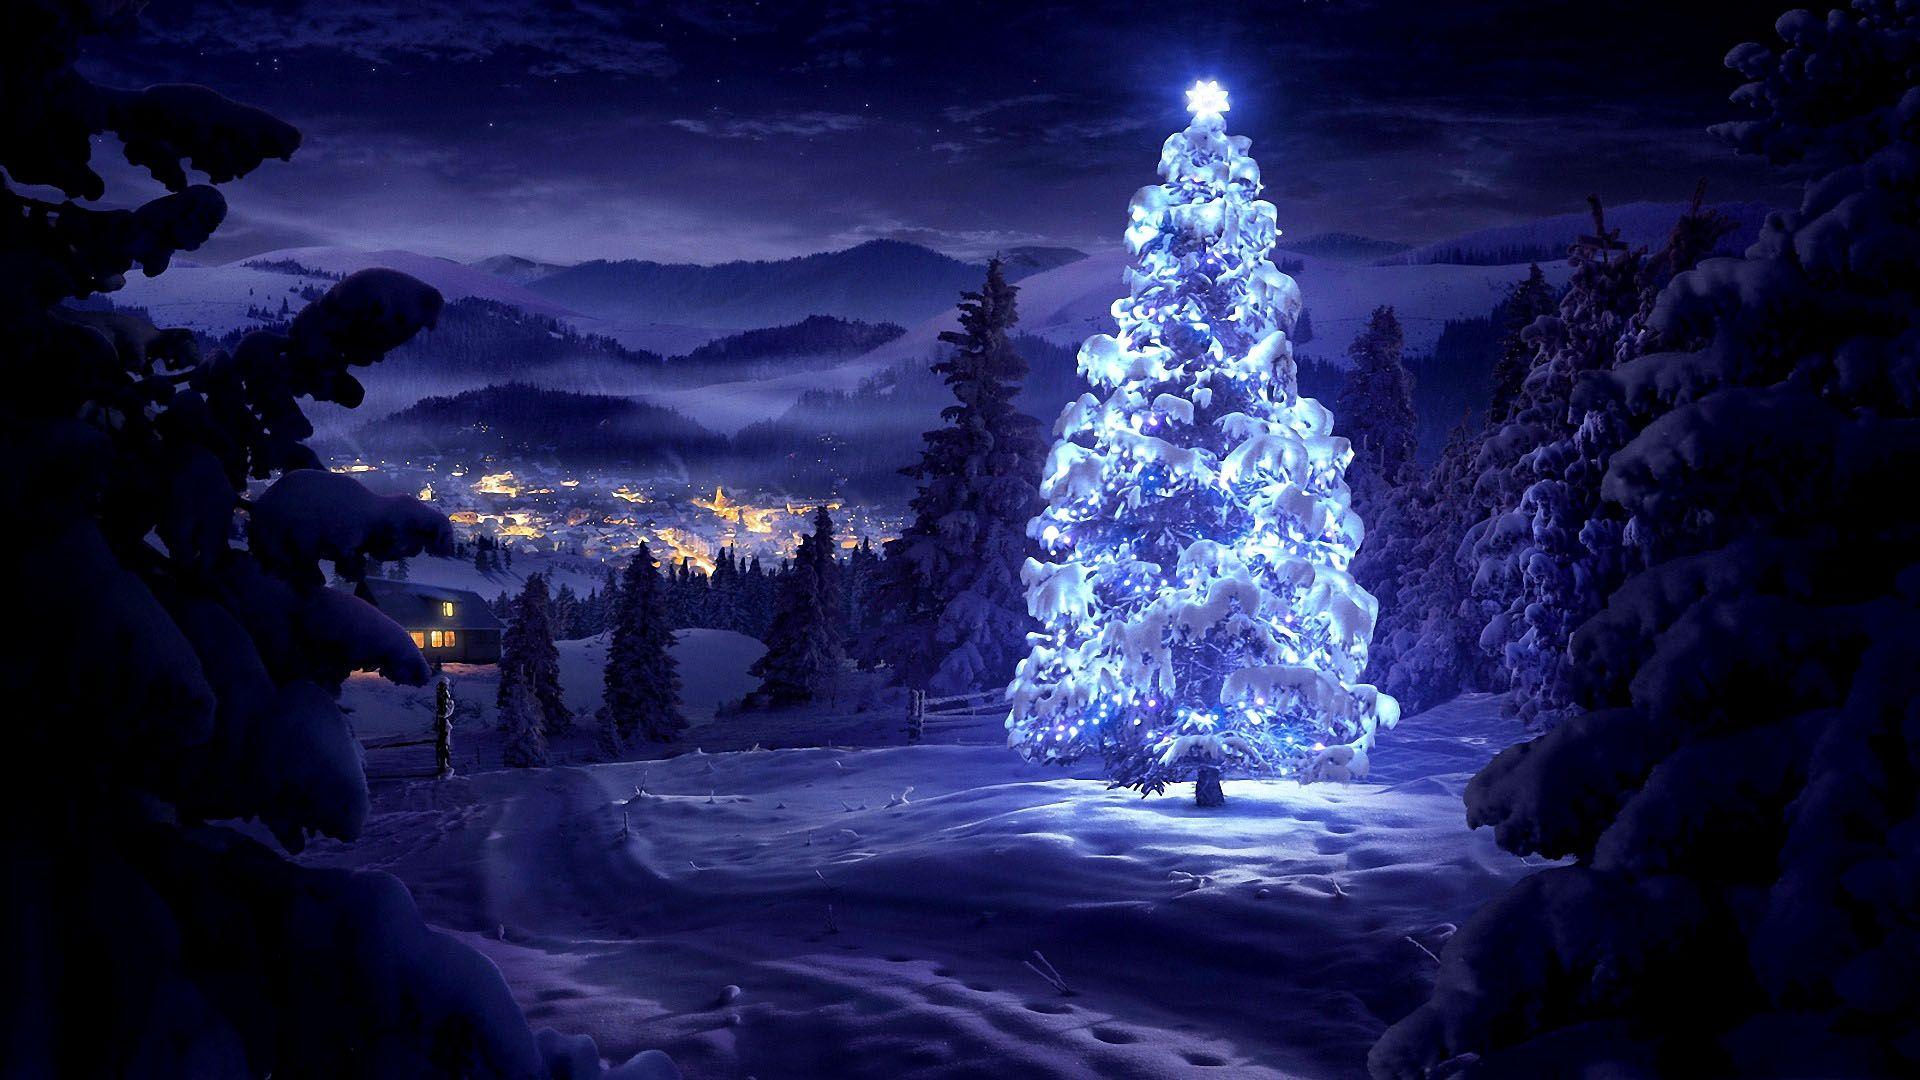 Merry Christmas Wallpaper HD free download